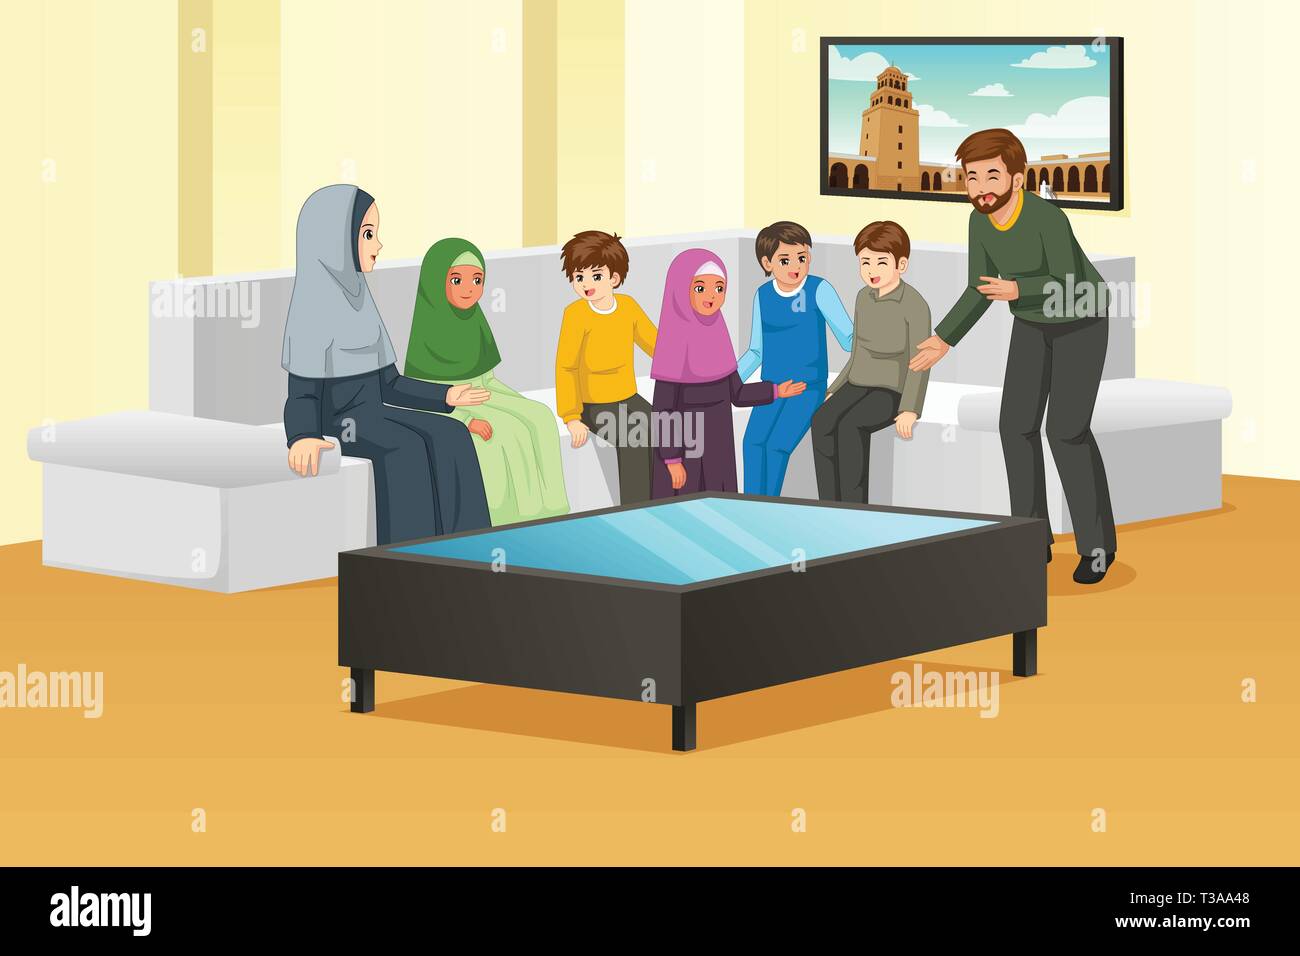 A vector illustration of Happy Muslim Family at Home Stock Vector